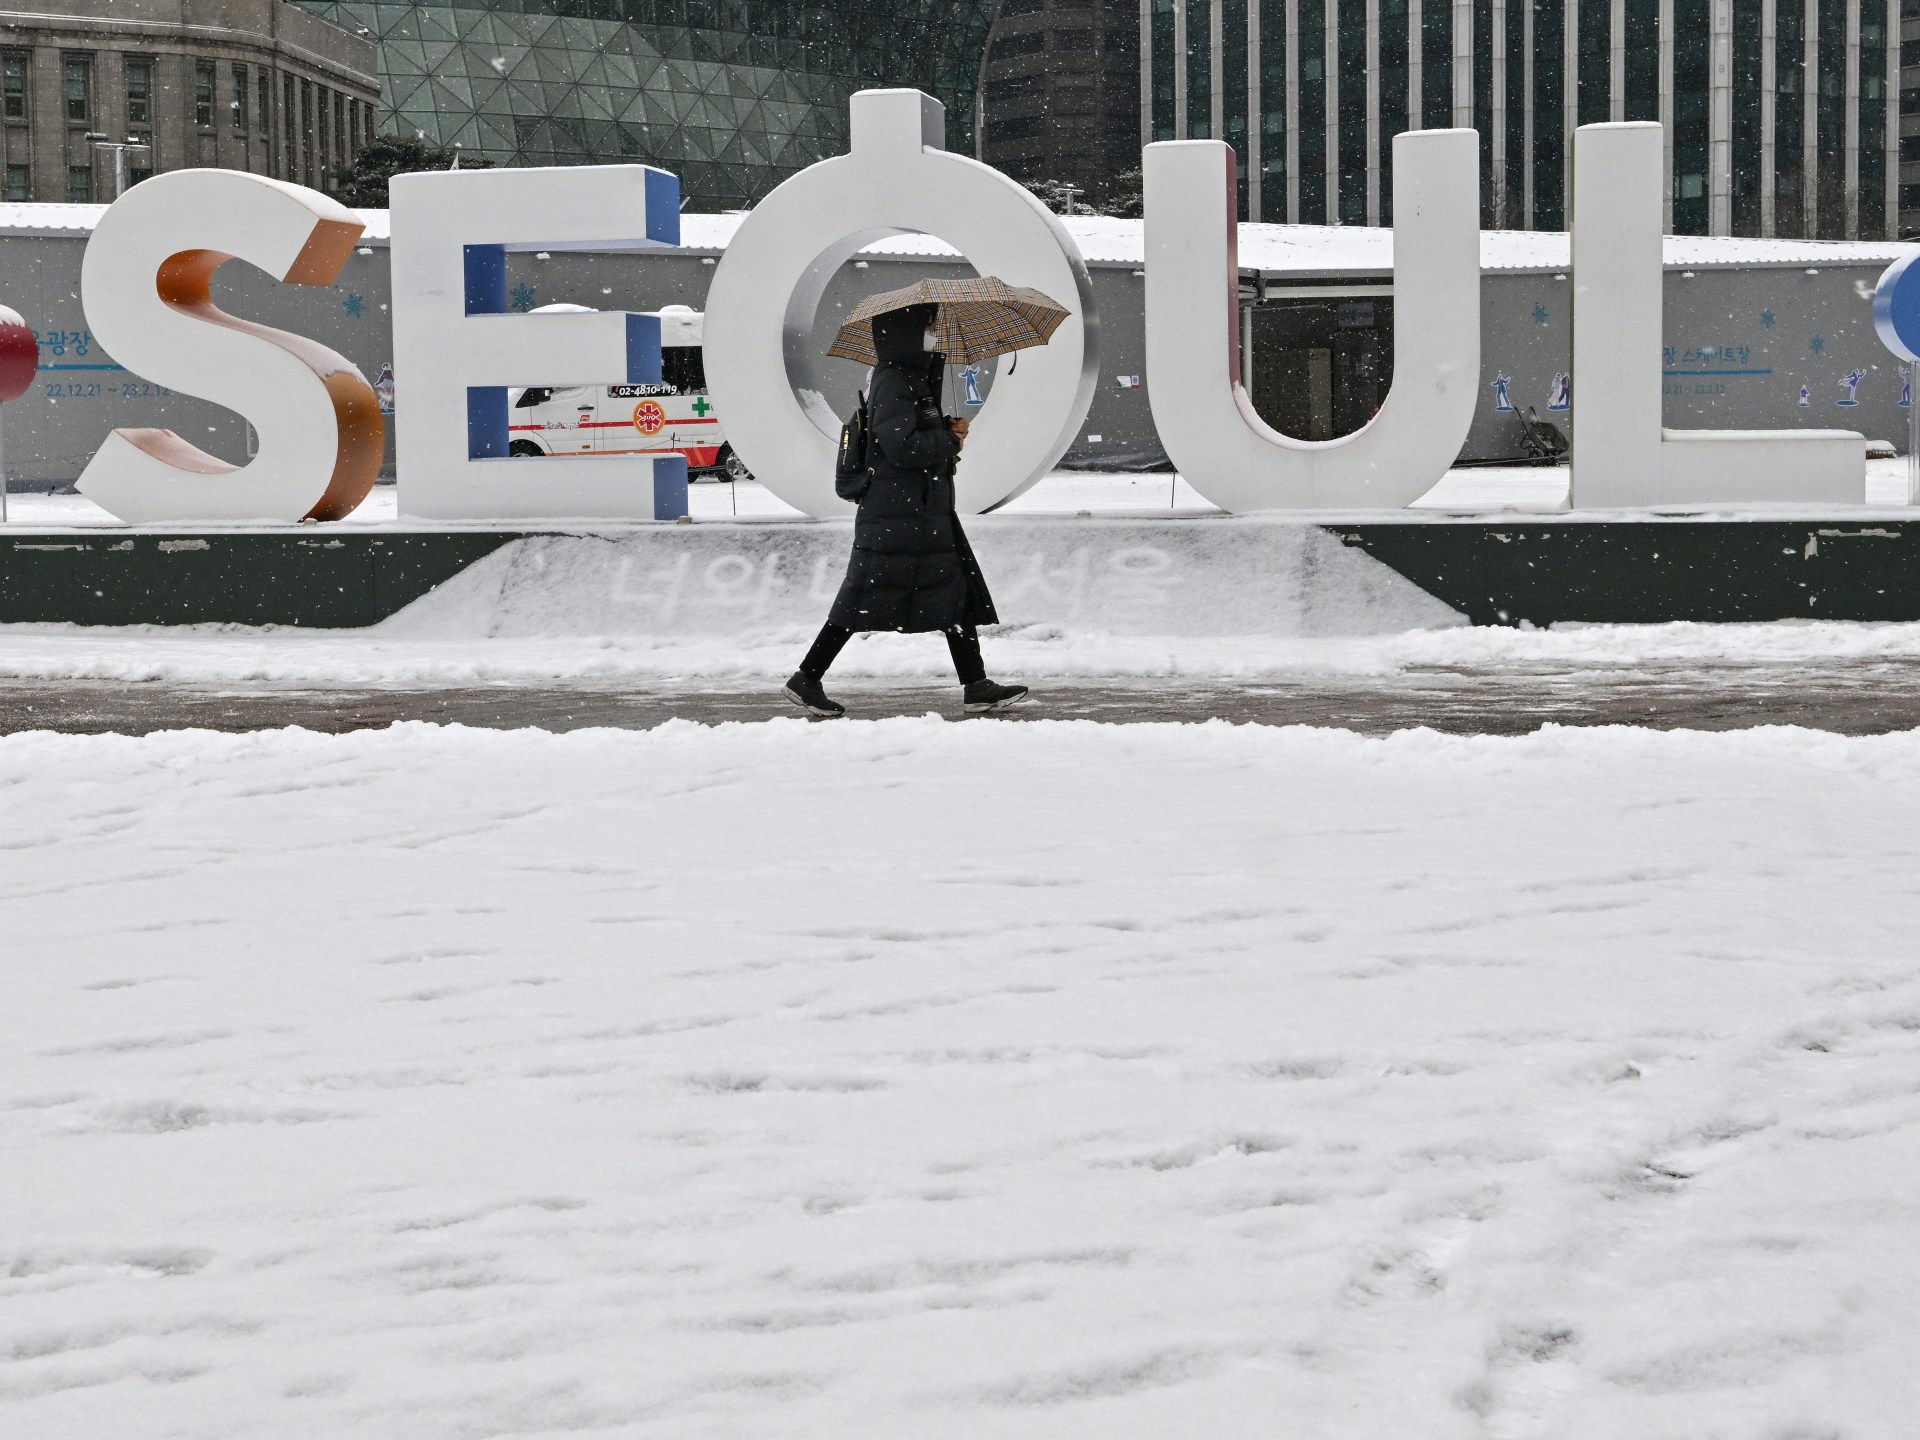 South Korea’s capital weathers snowstorm as cold spell bites